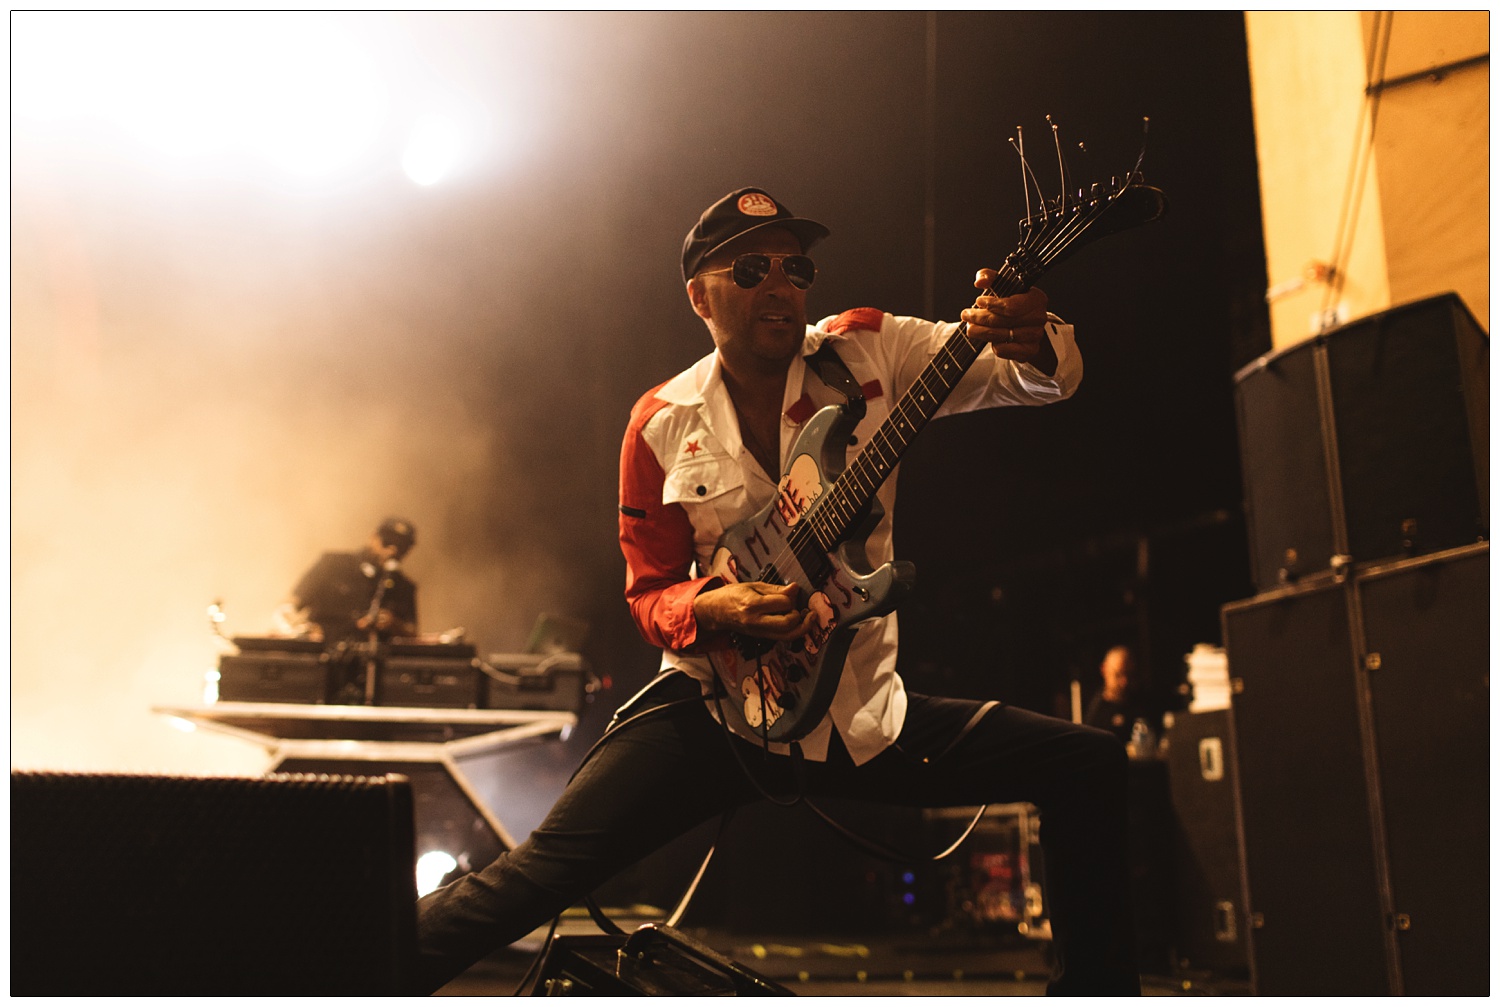 Tom Morello playing the Arm the Homeless guitar on stage at Brixton with Prophets of Rage.